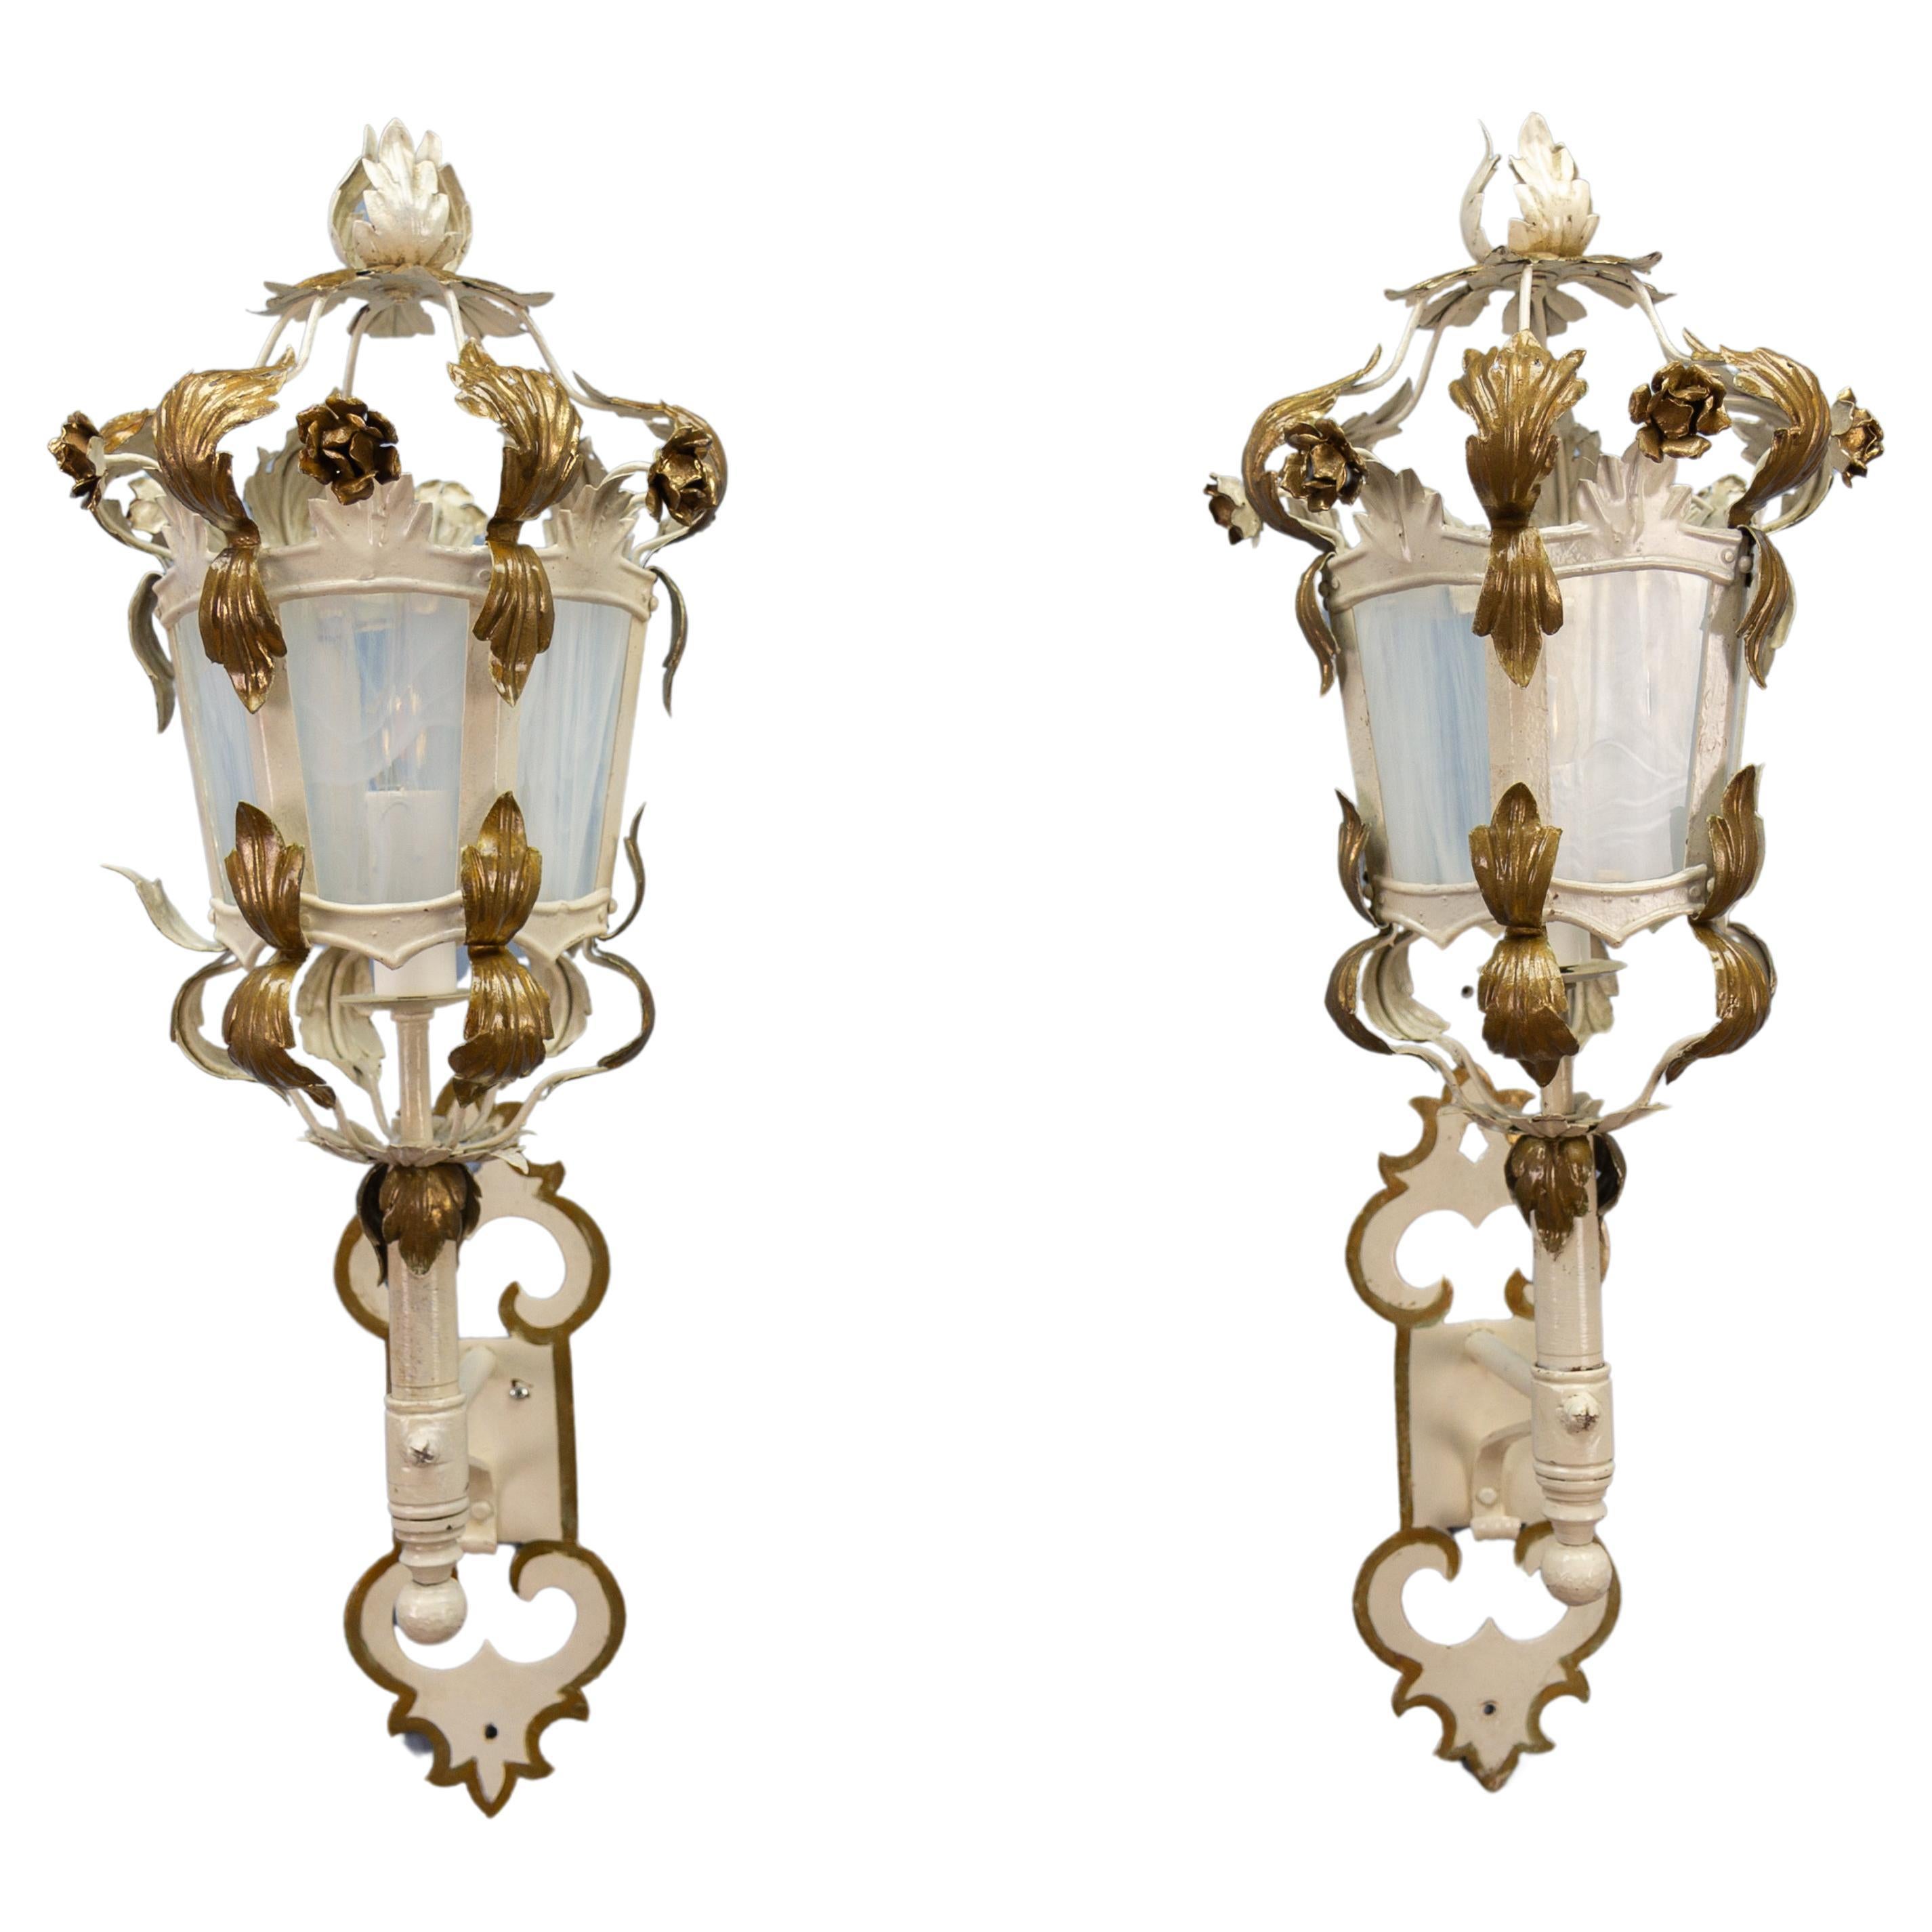 Pair of Italian White and Golden Color Metal and Glass Wall Lanterns, ca. 1970s For Sale